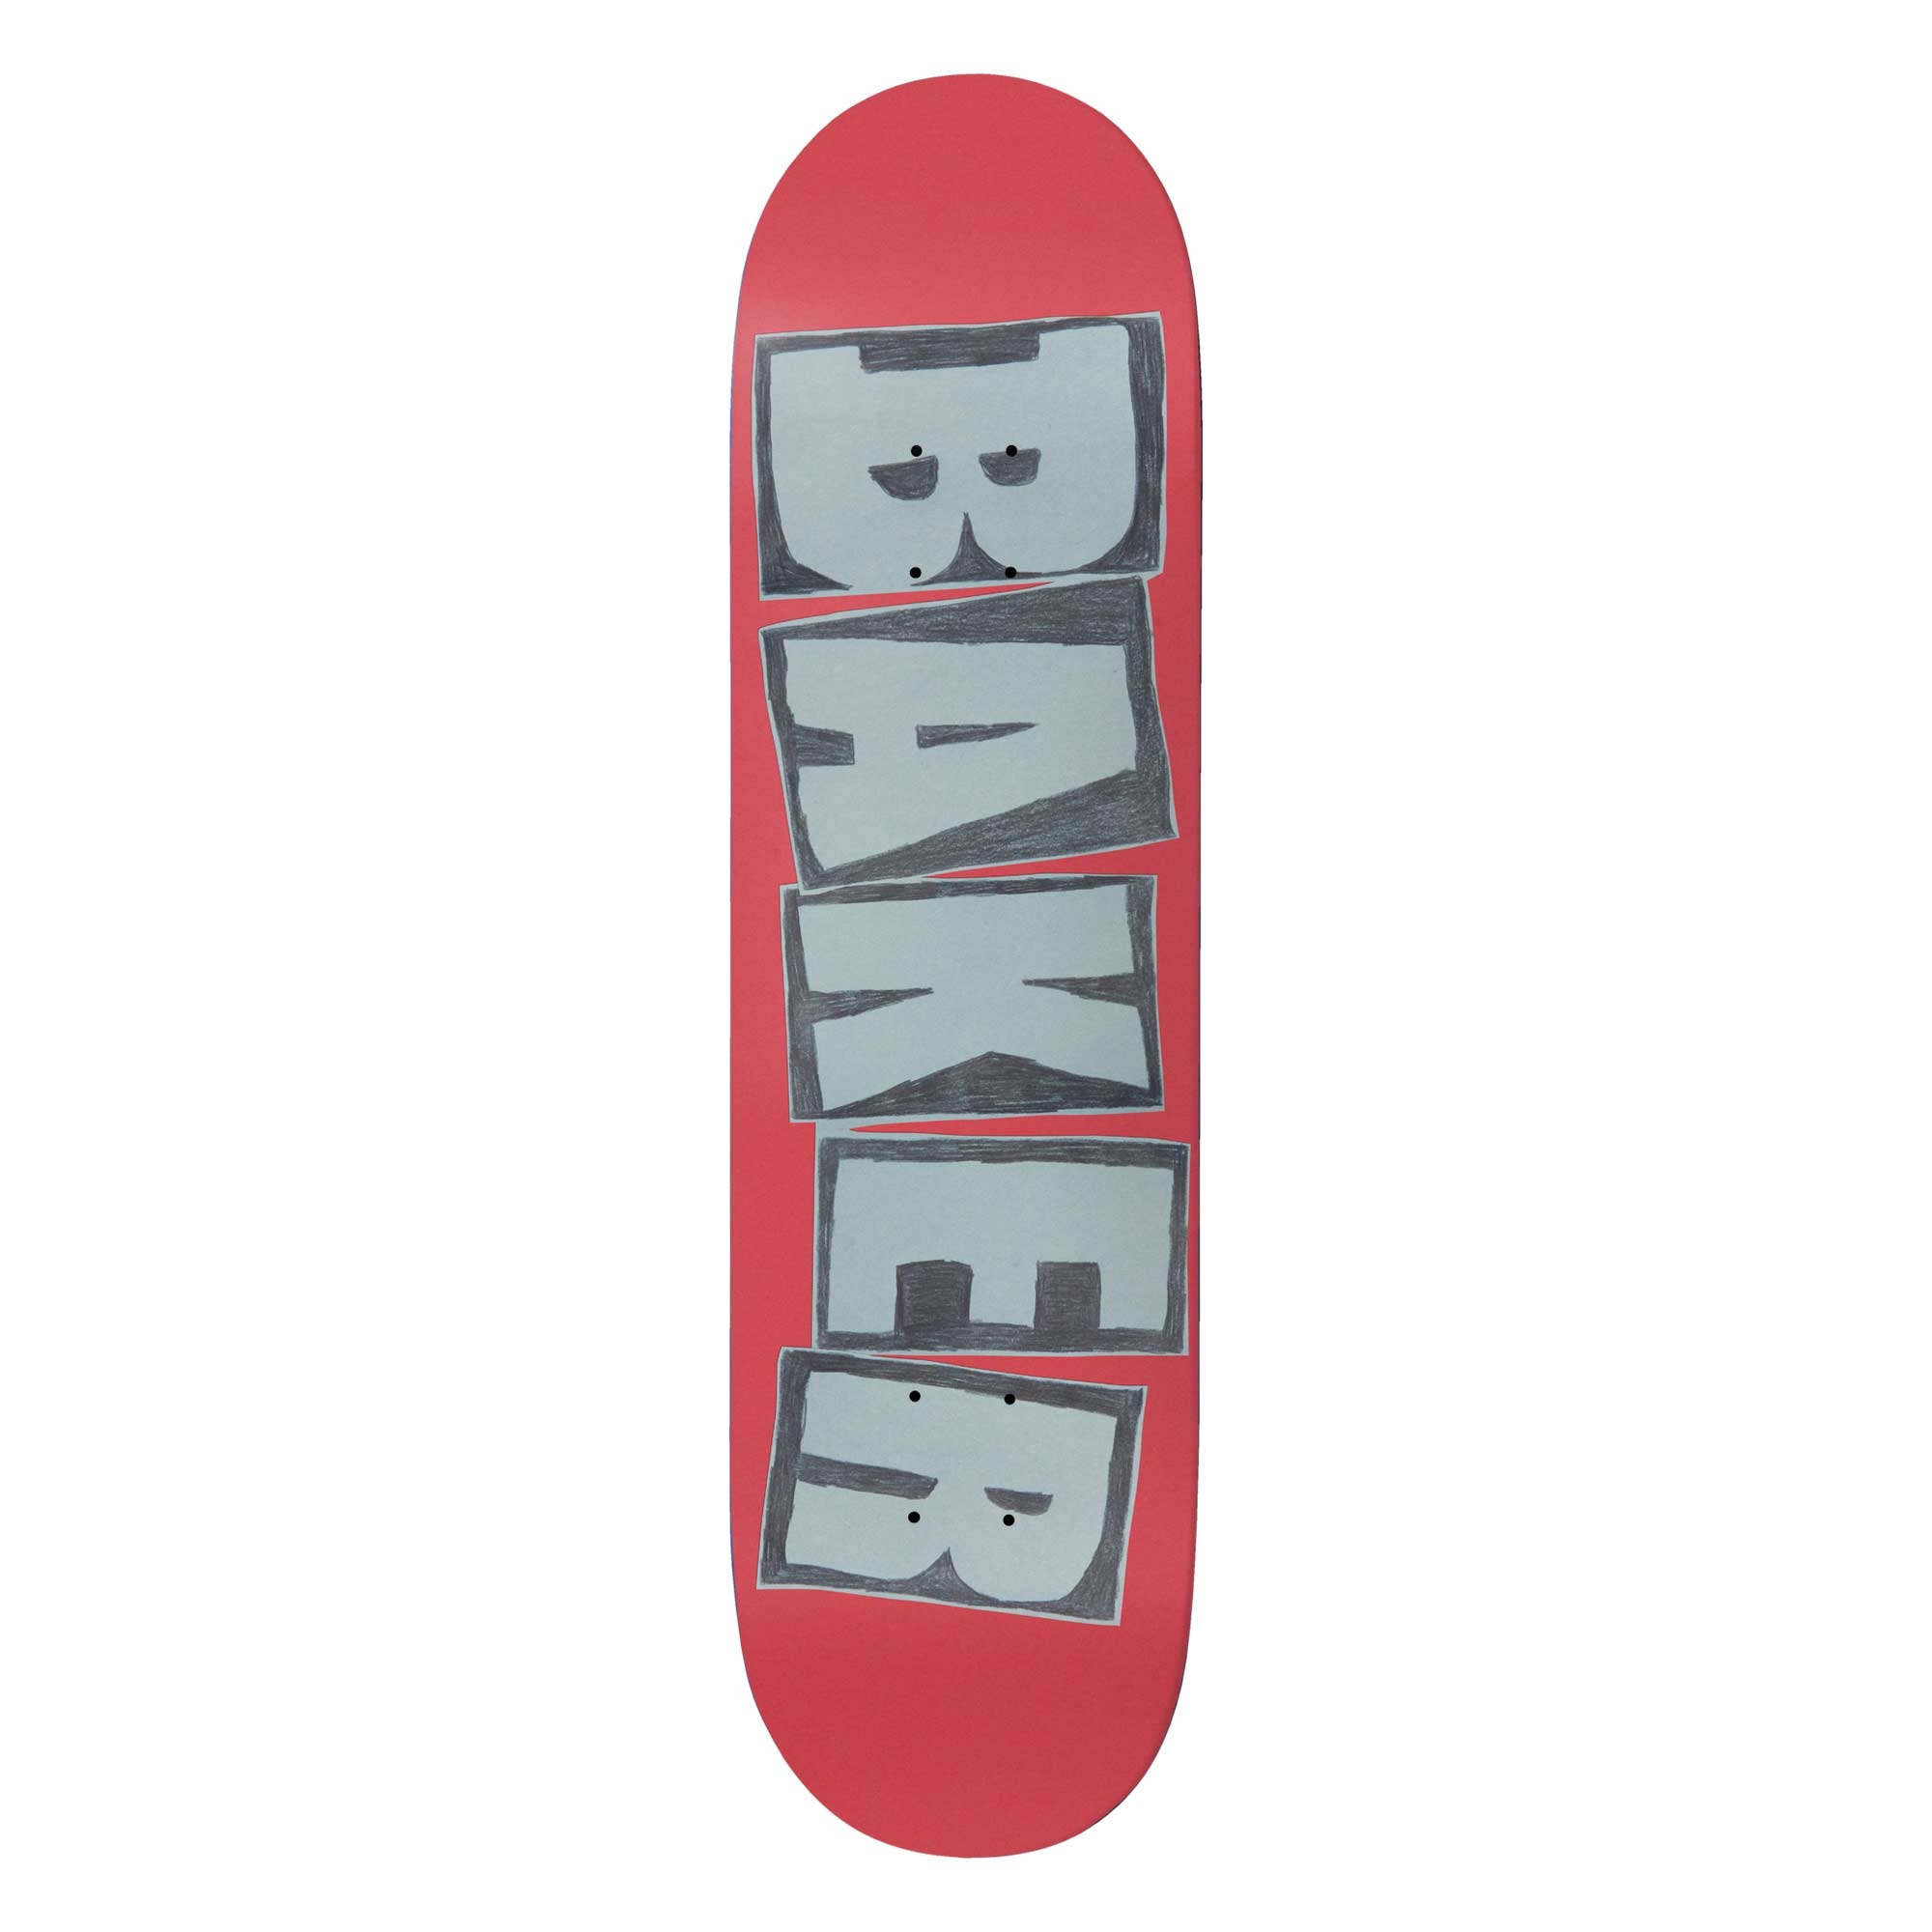 BAKER Deck SKETCHY RED TB 8.5, red 8.5''